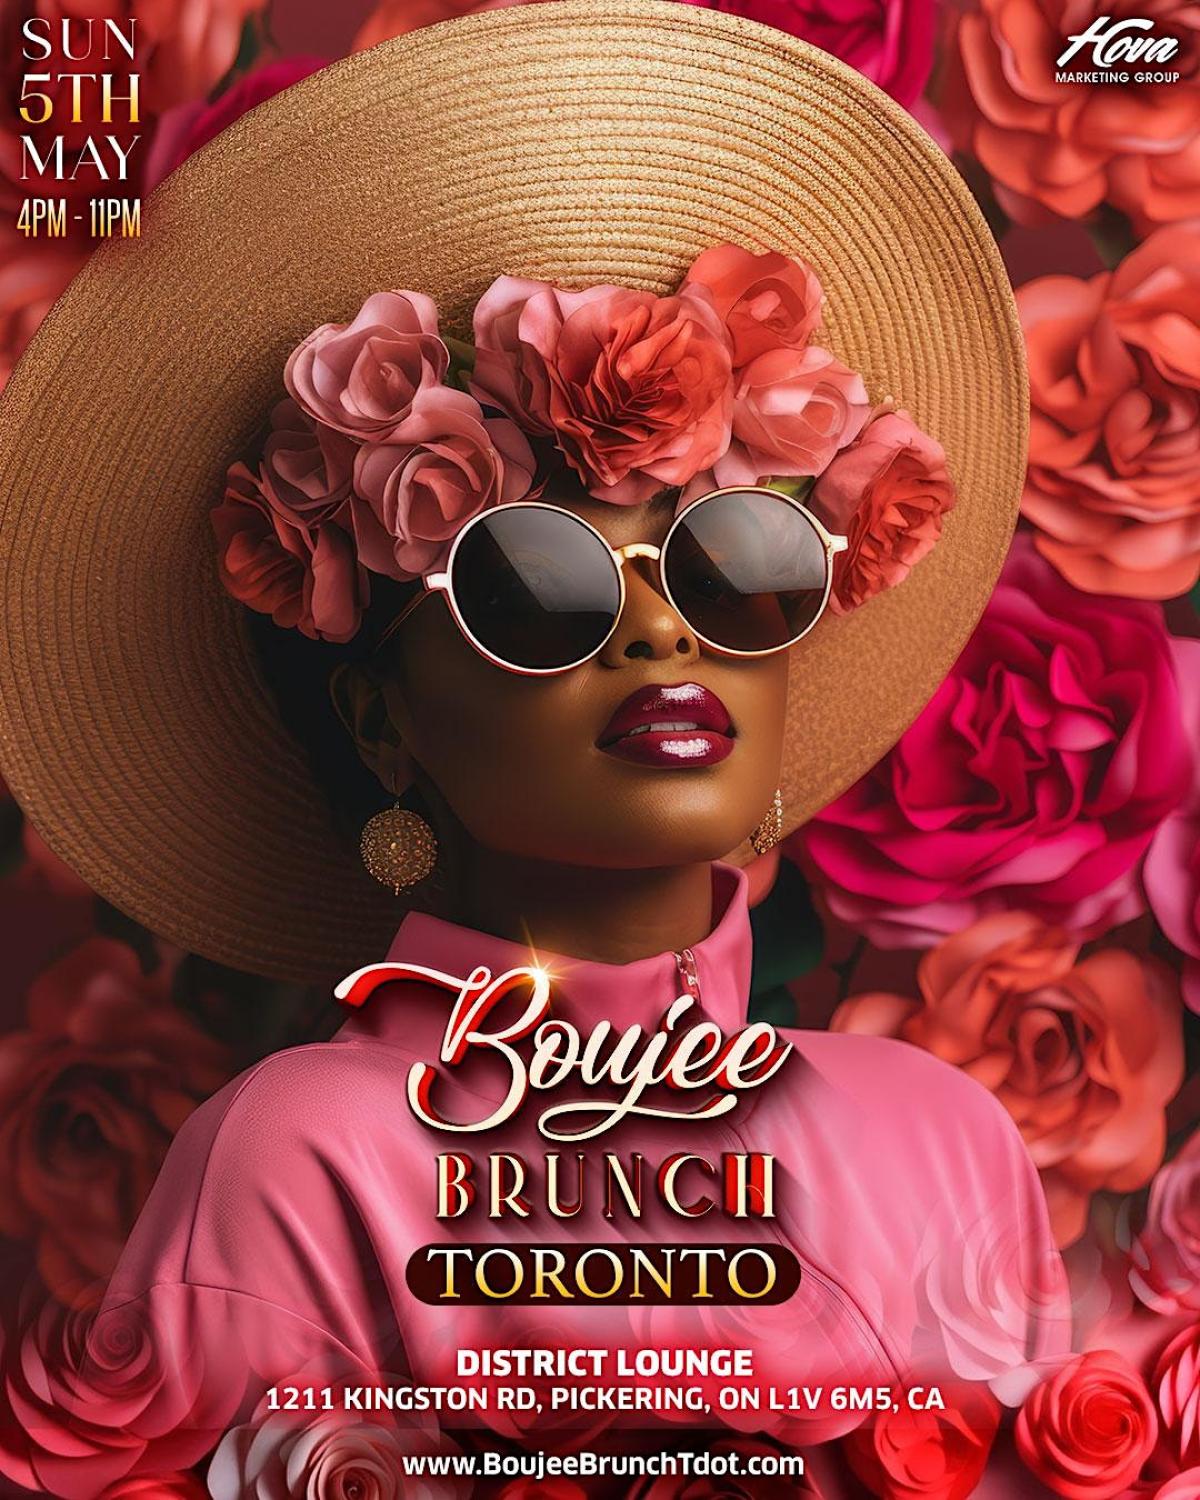 Boujee Brunch  flyer or graphic.